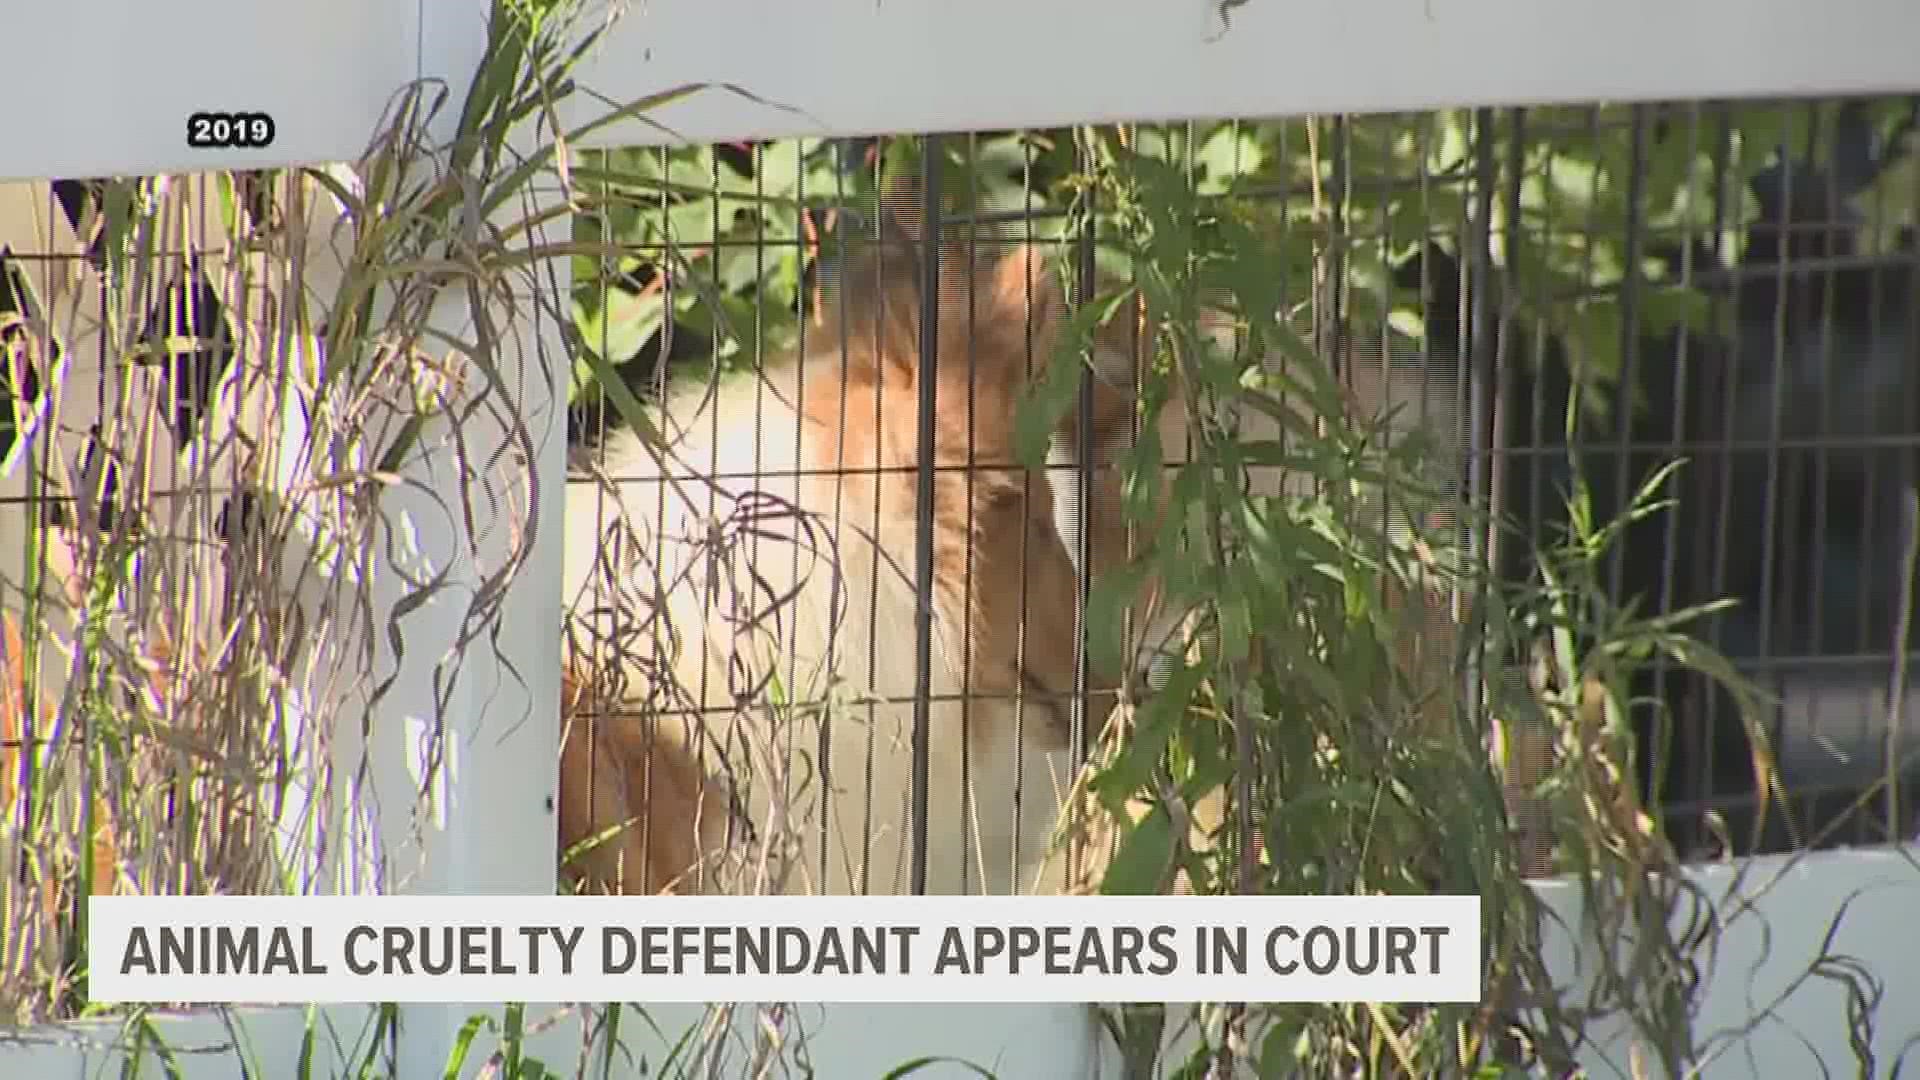 The Sherrard woman facing animal cruelty whose 198 dogs were rescued could see them permanently taken from her if the judge agrees to the prosecution's request.